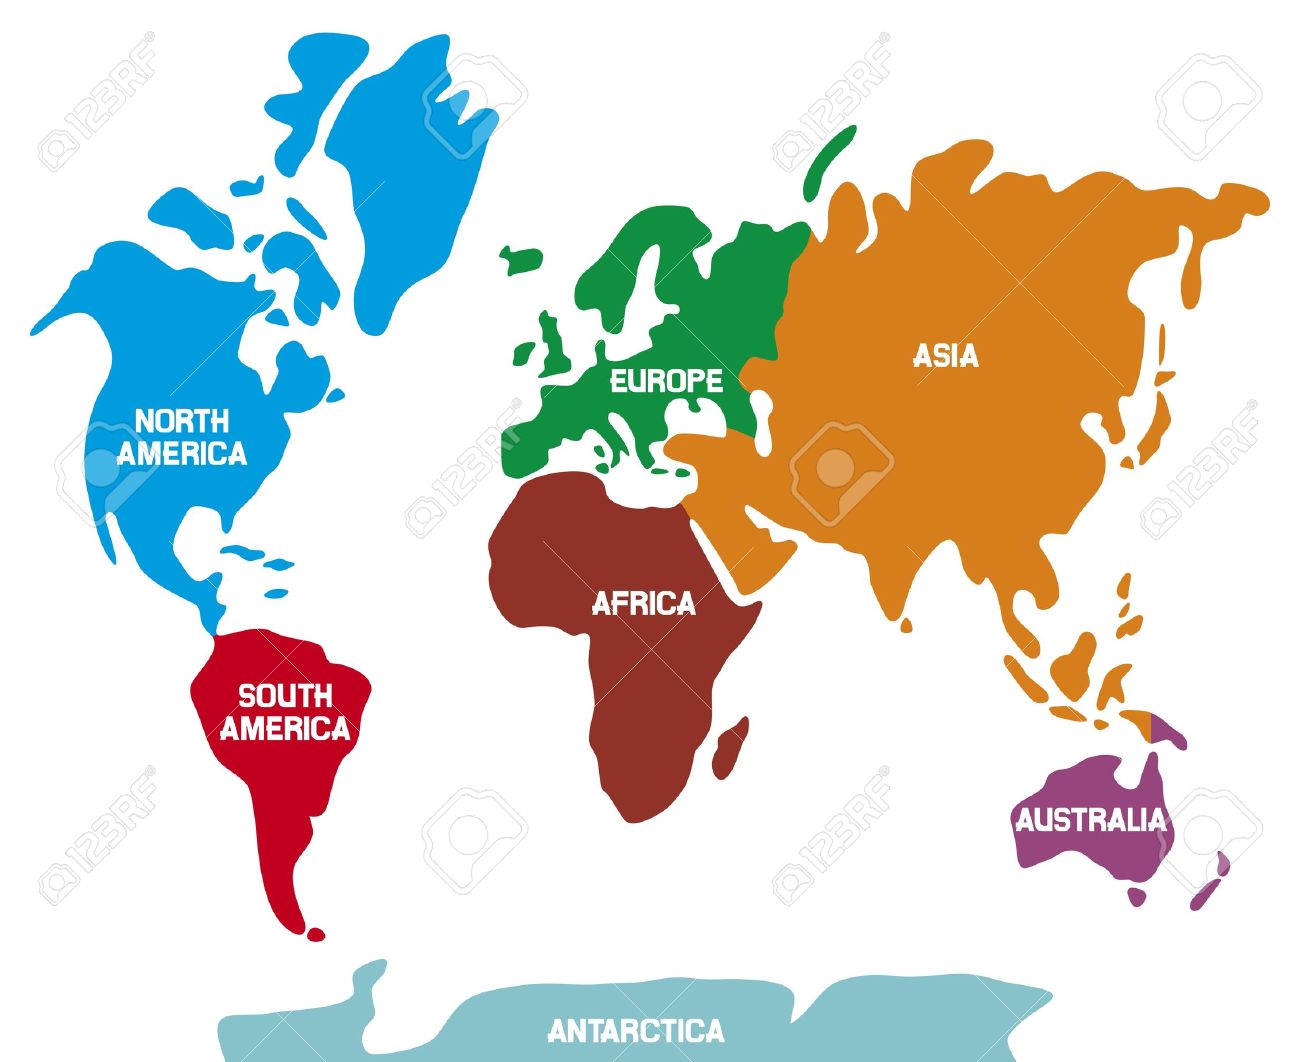 7 Continents Clipart.